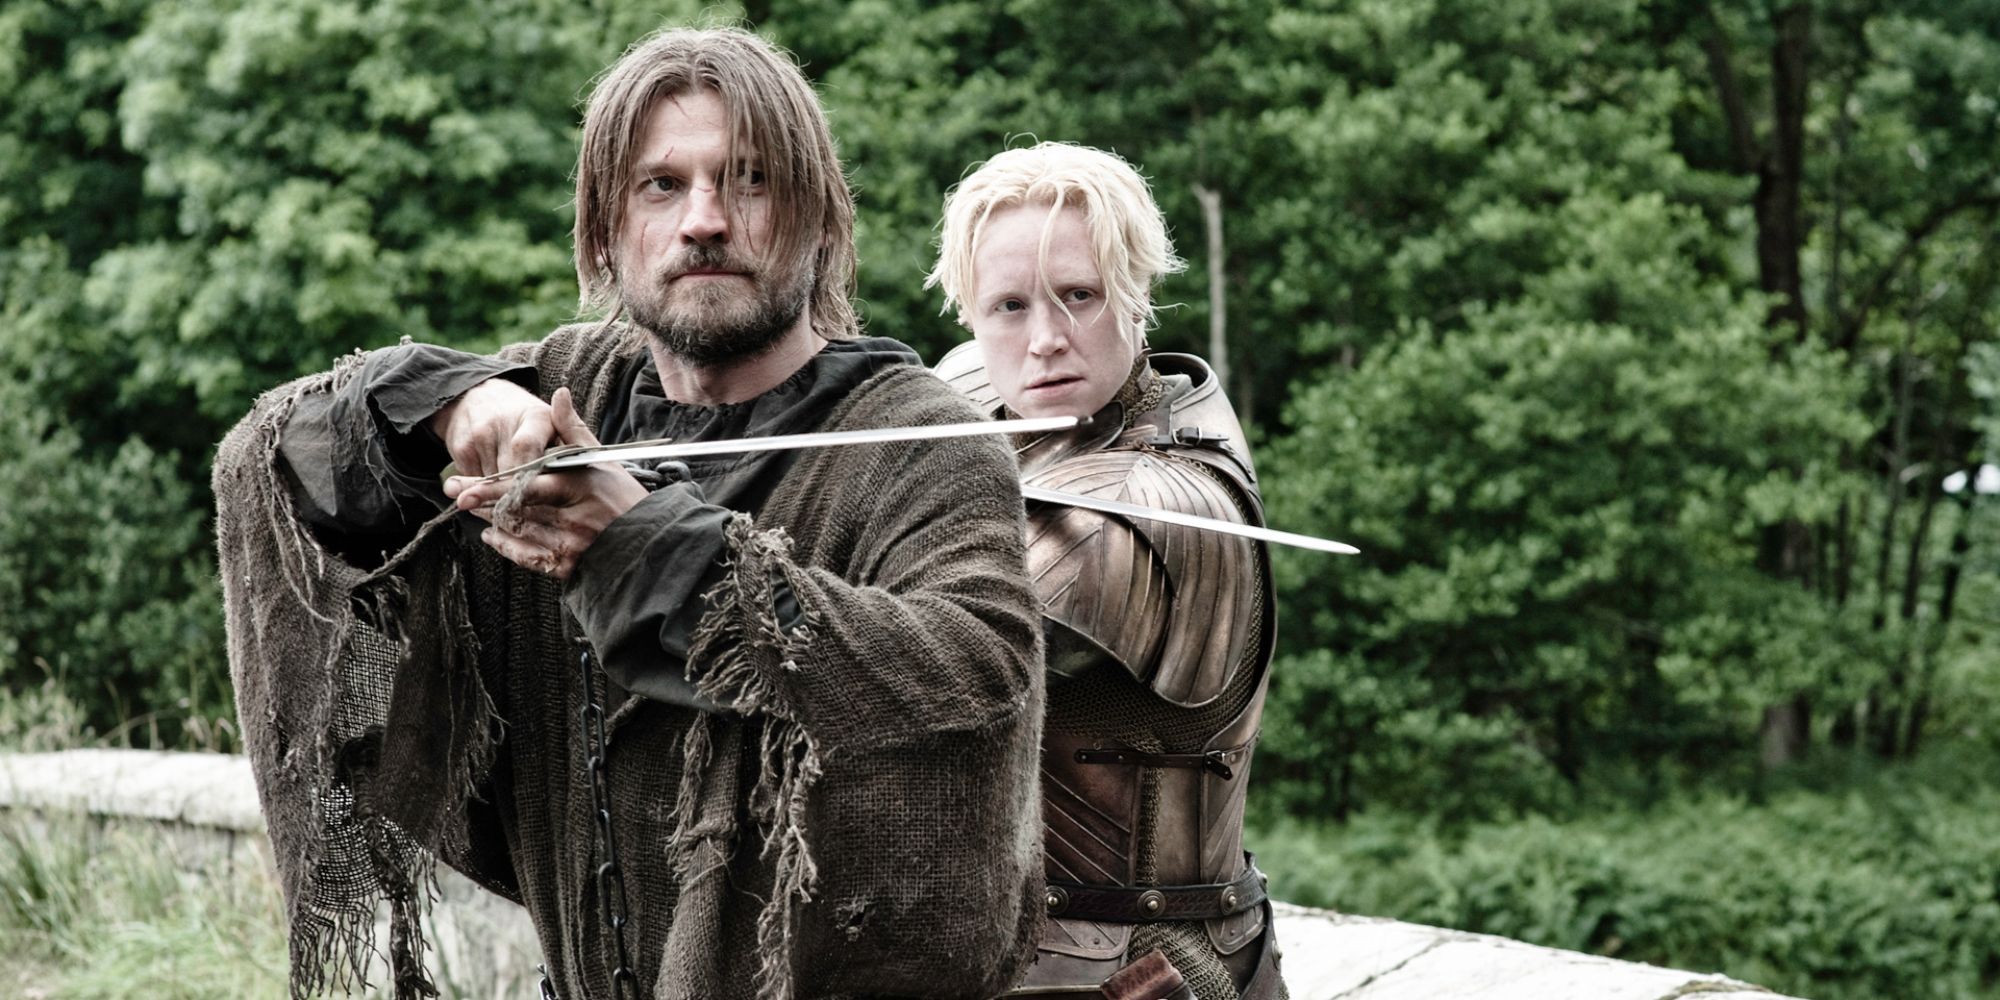 Jaime and Brienne stand side-by-side with swords at the ready